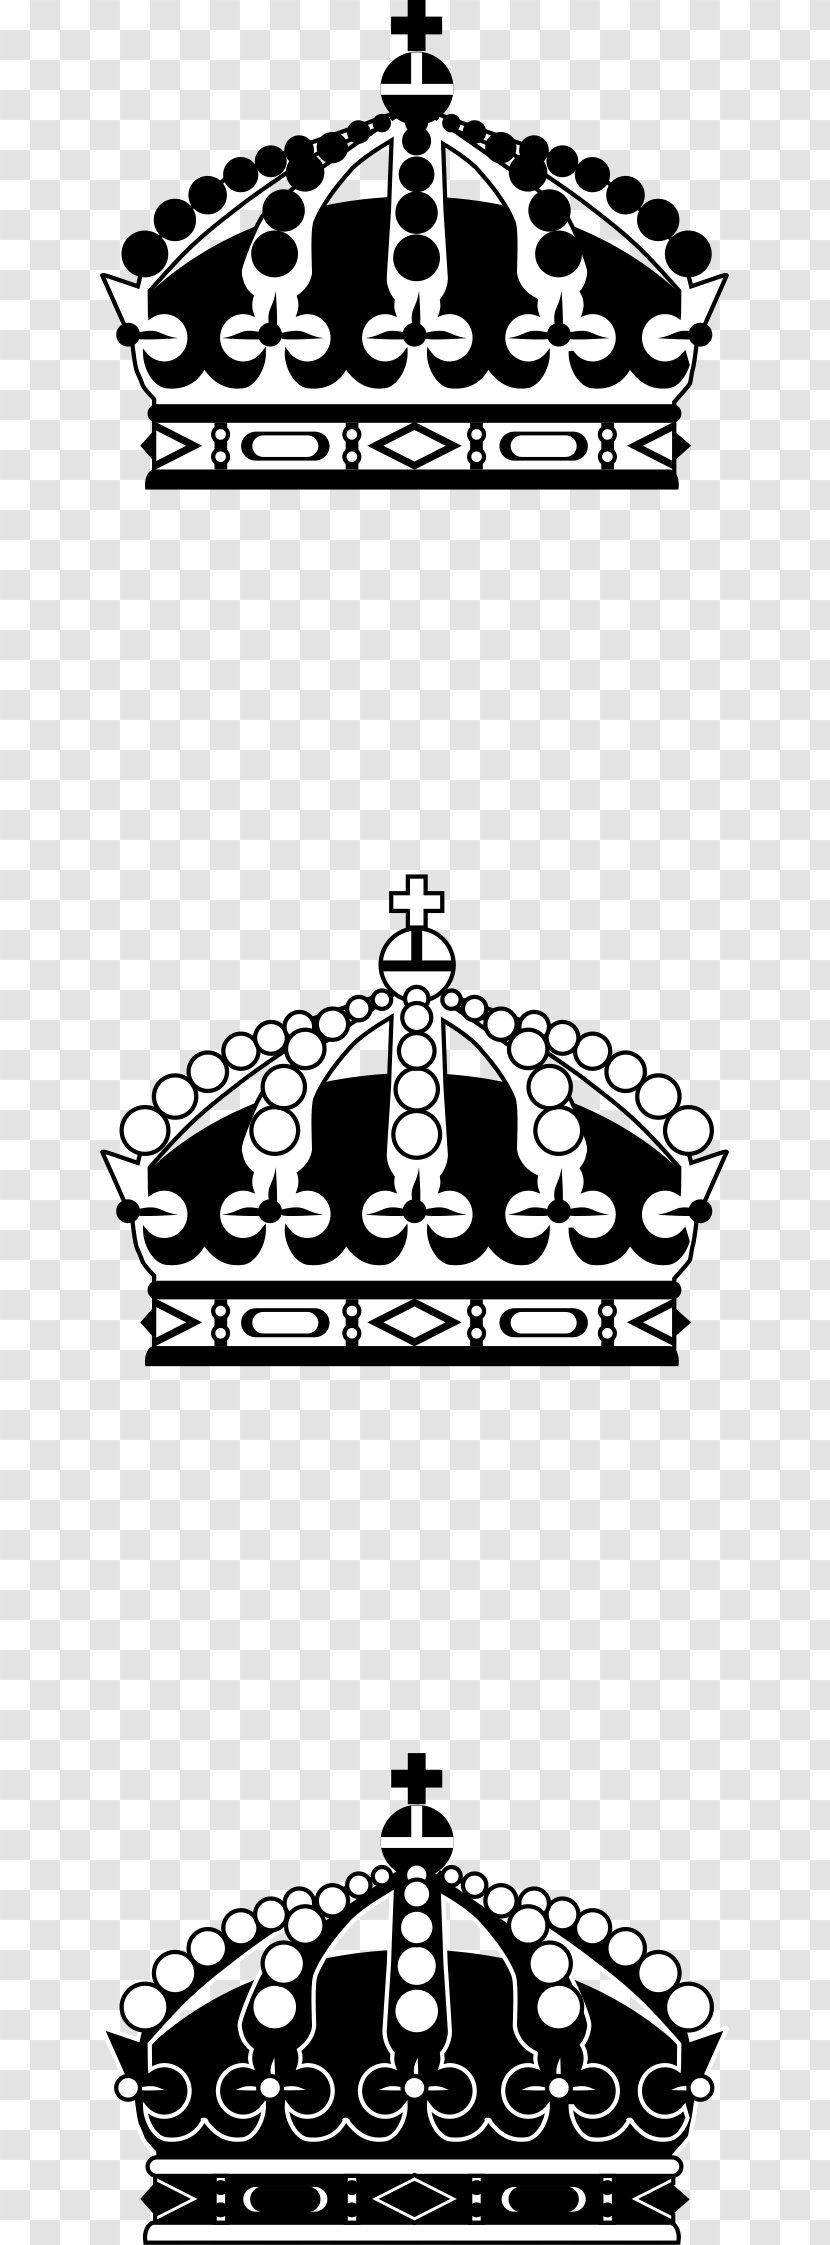 Black And White Crown Clip Art - Symbol - Imperial Transparent PNG